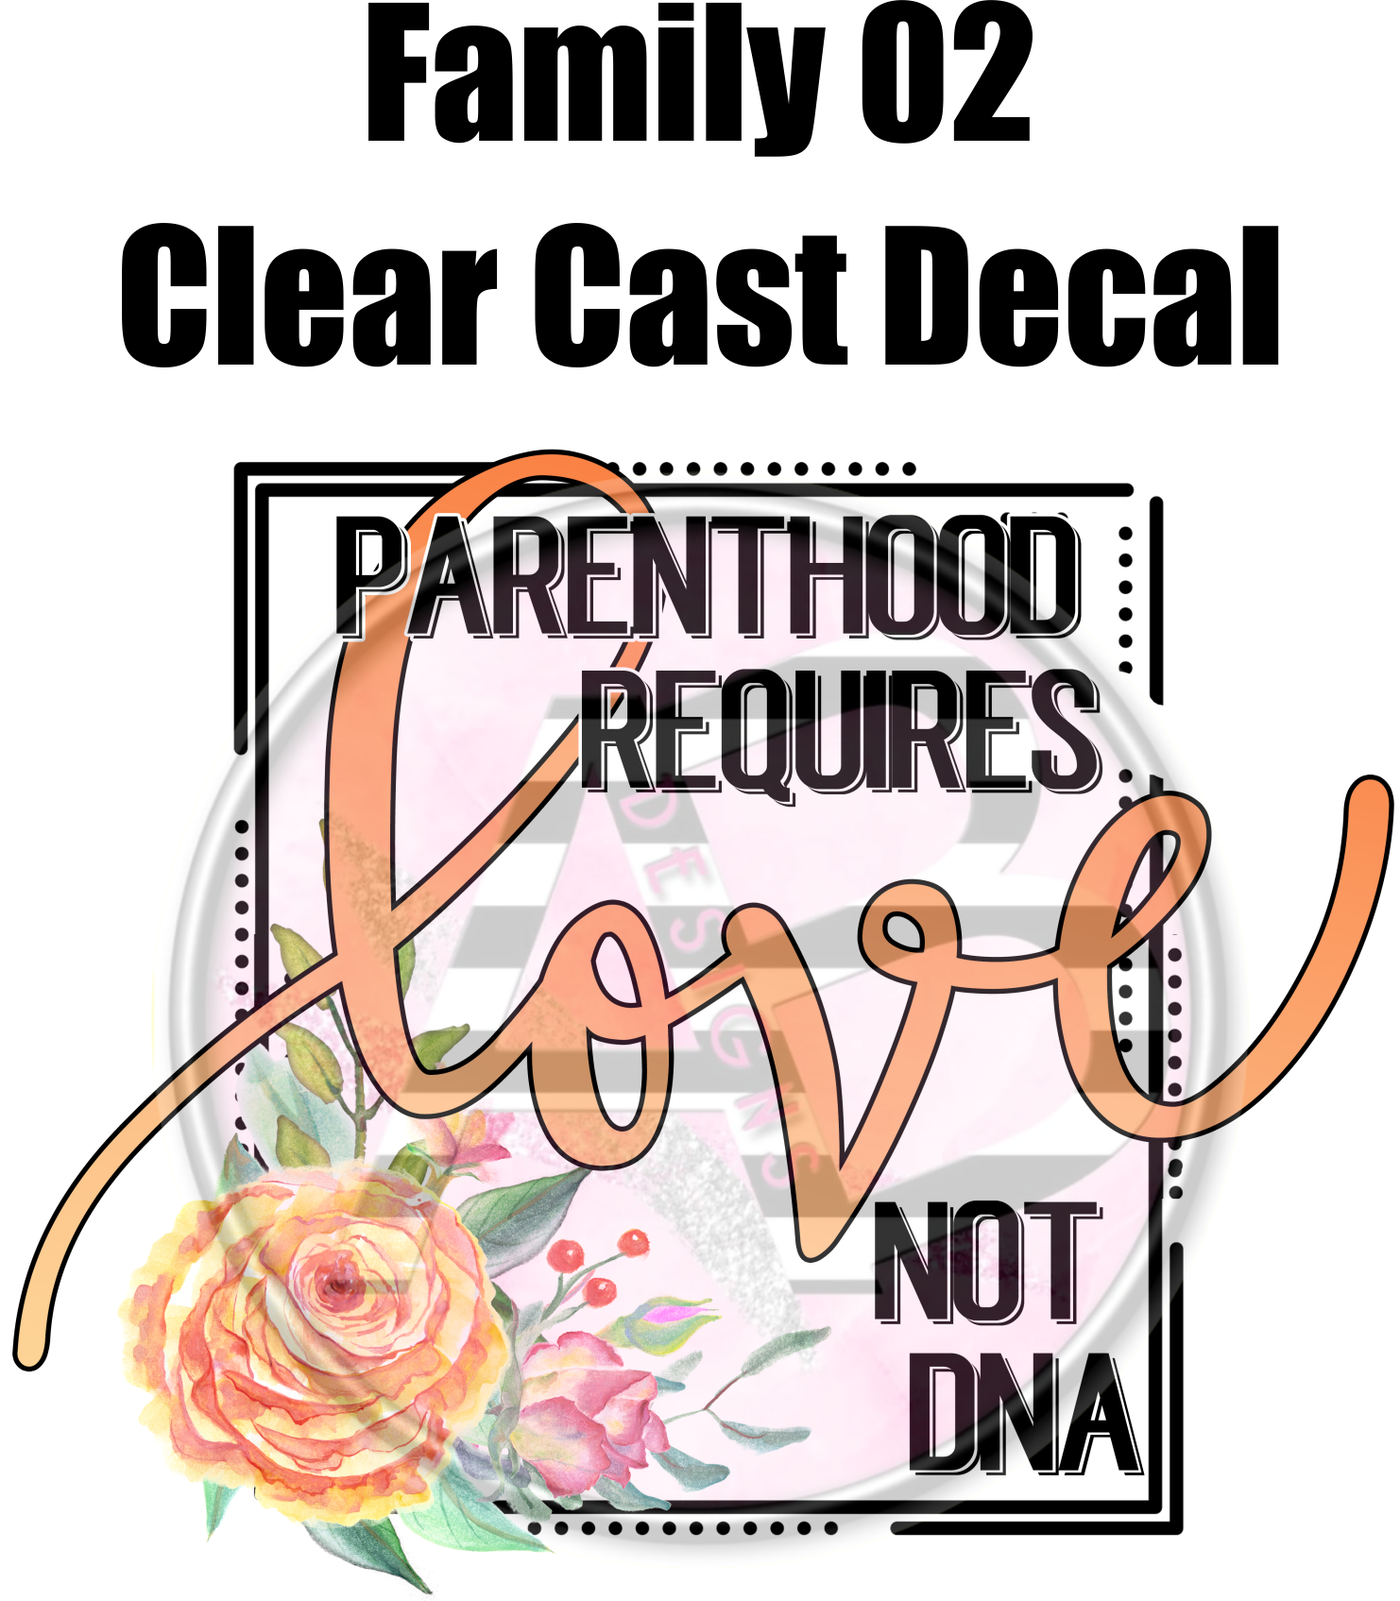 Family 02 - Clear Cast Decal - 76